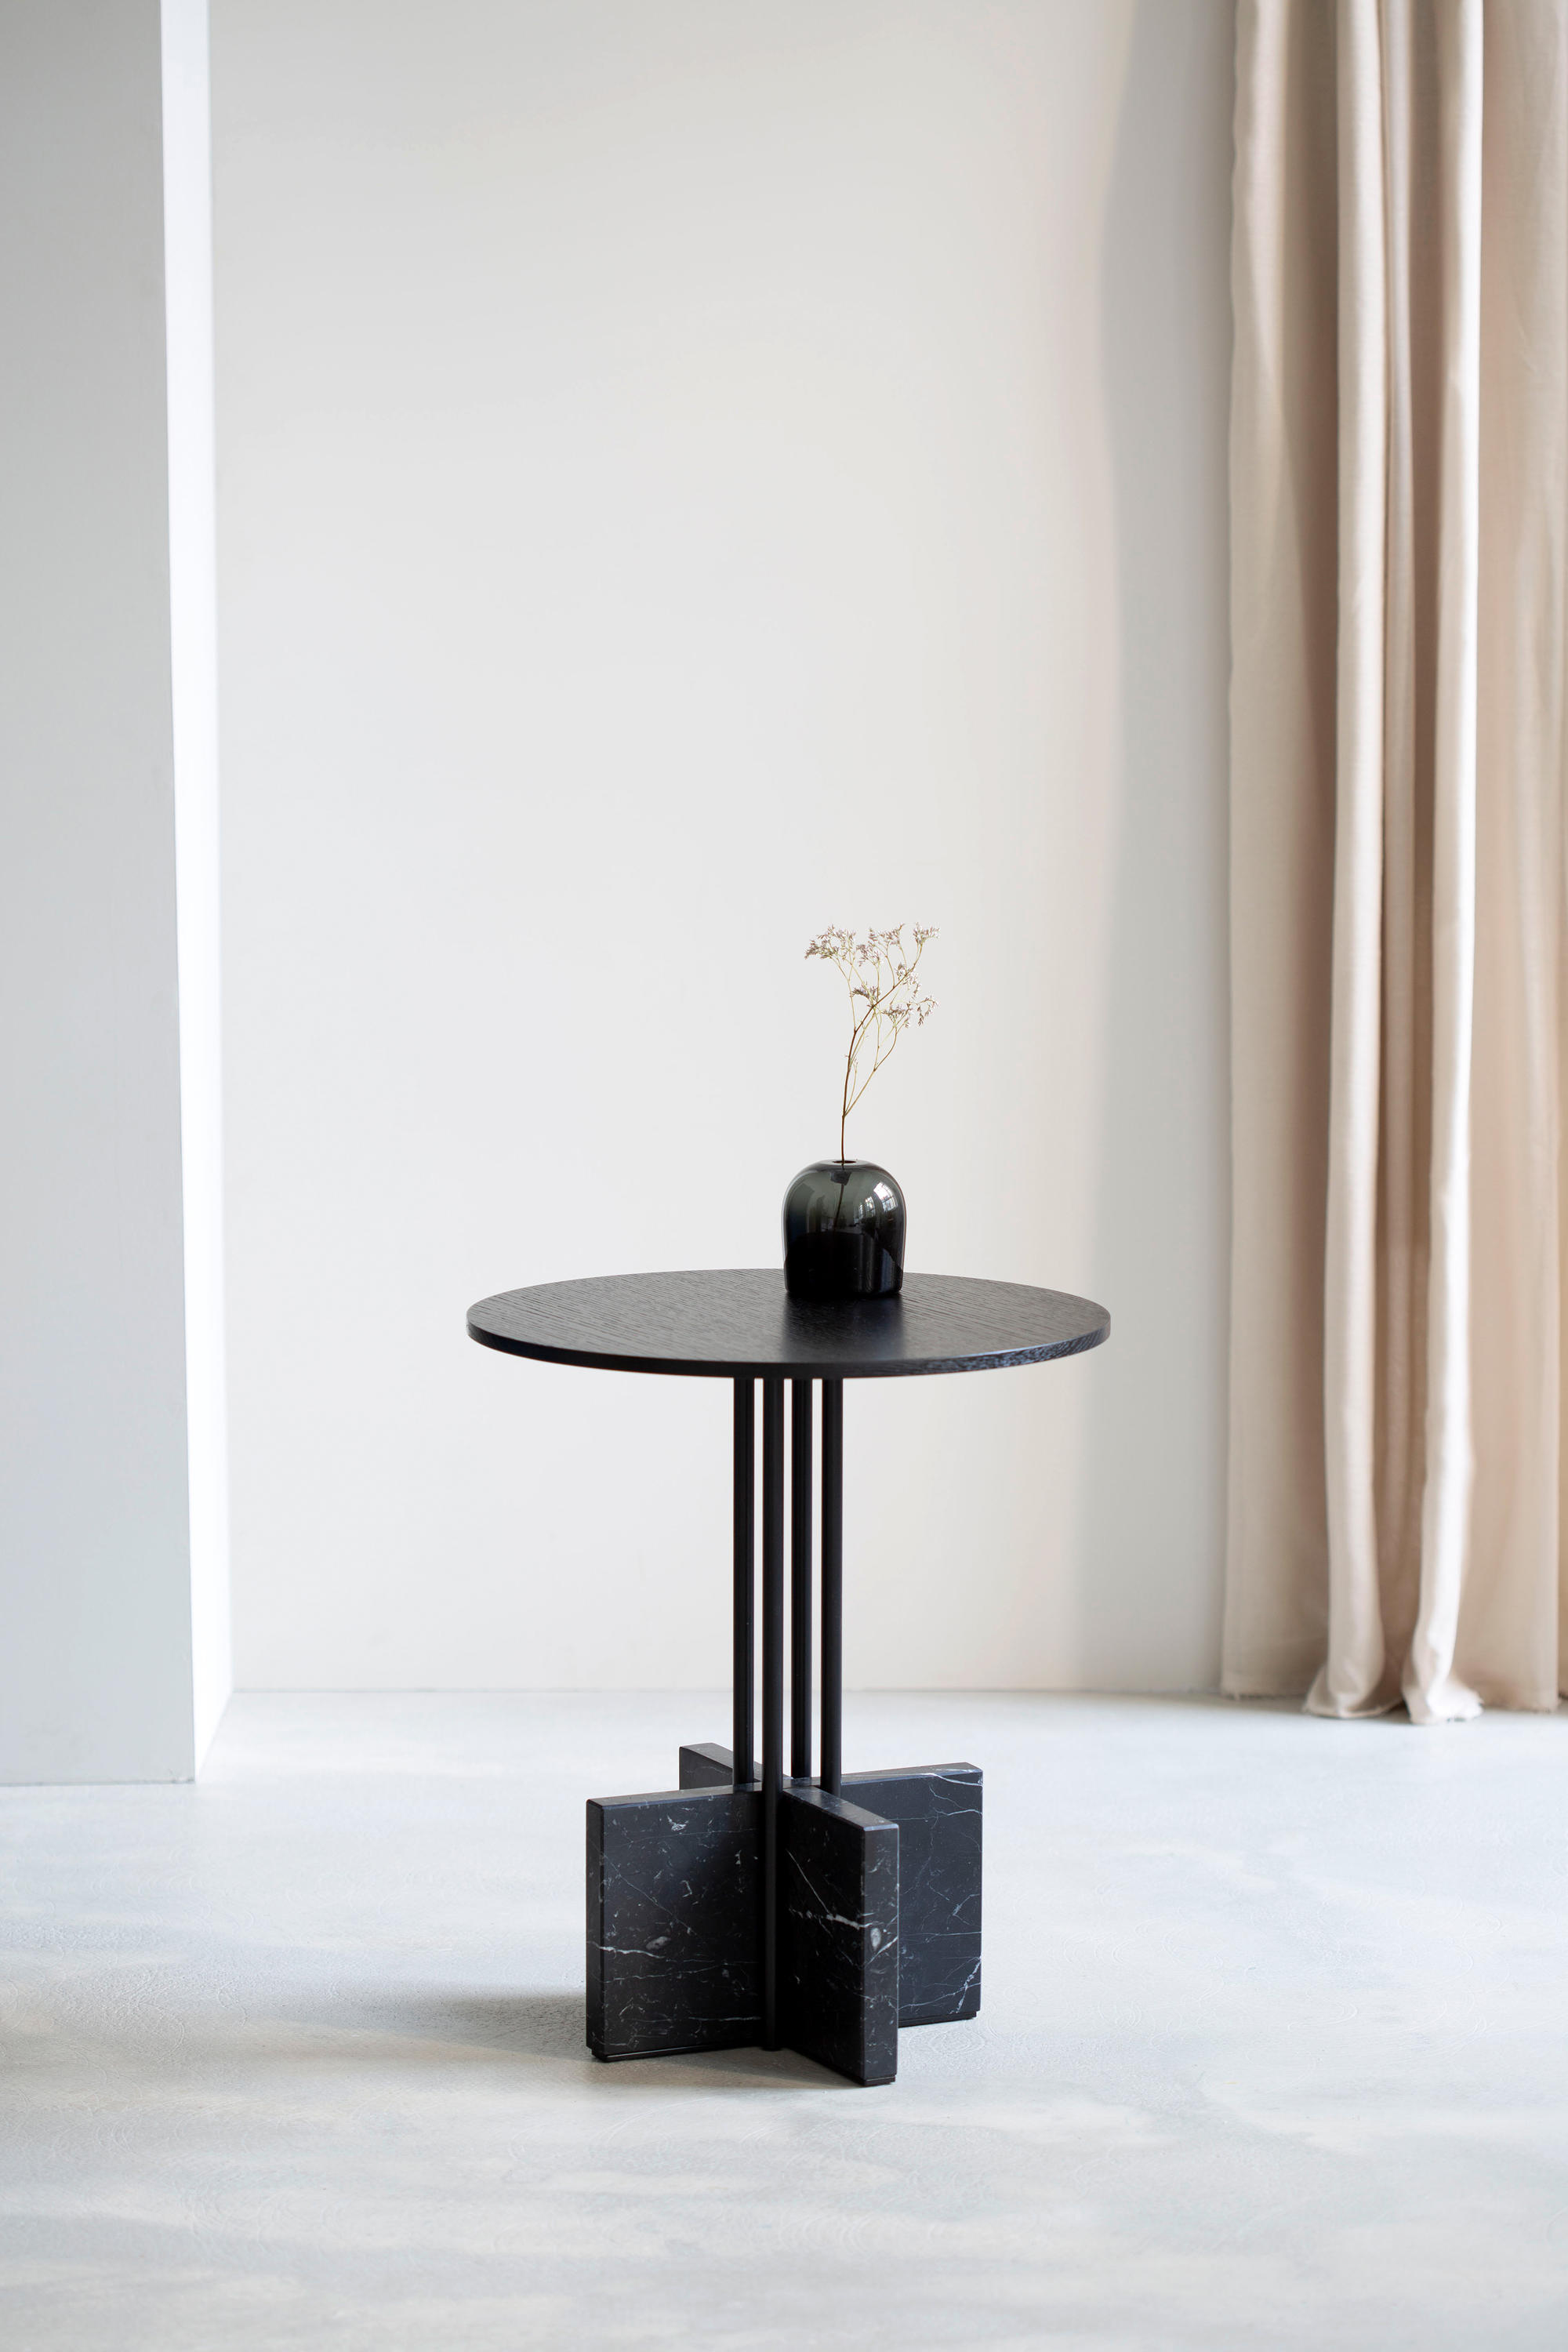 GRAVITY Table by Hanne Willmann for Favius